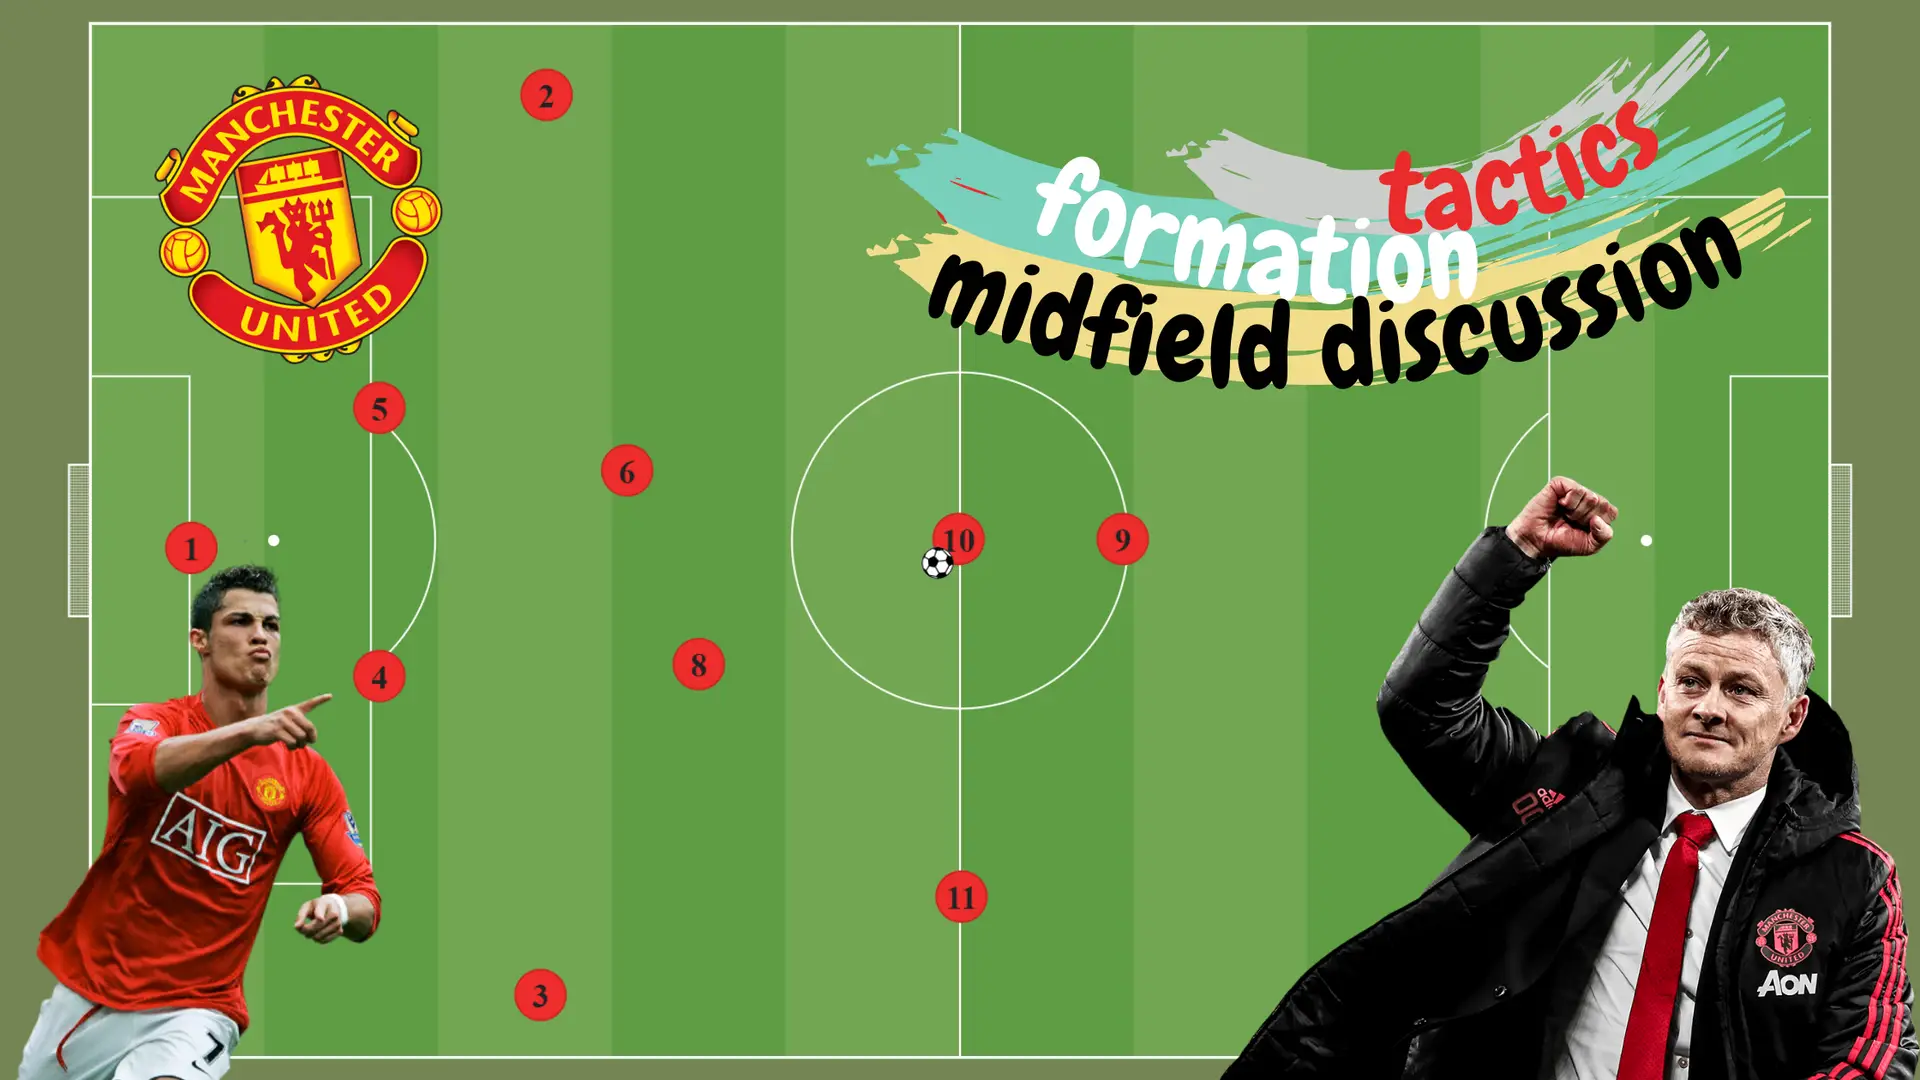 Tactics, Formation, & Midfield Discussion